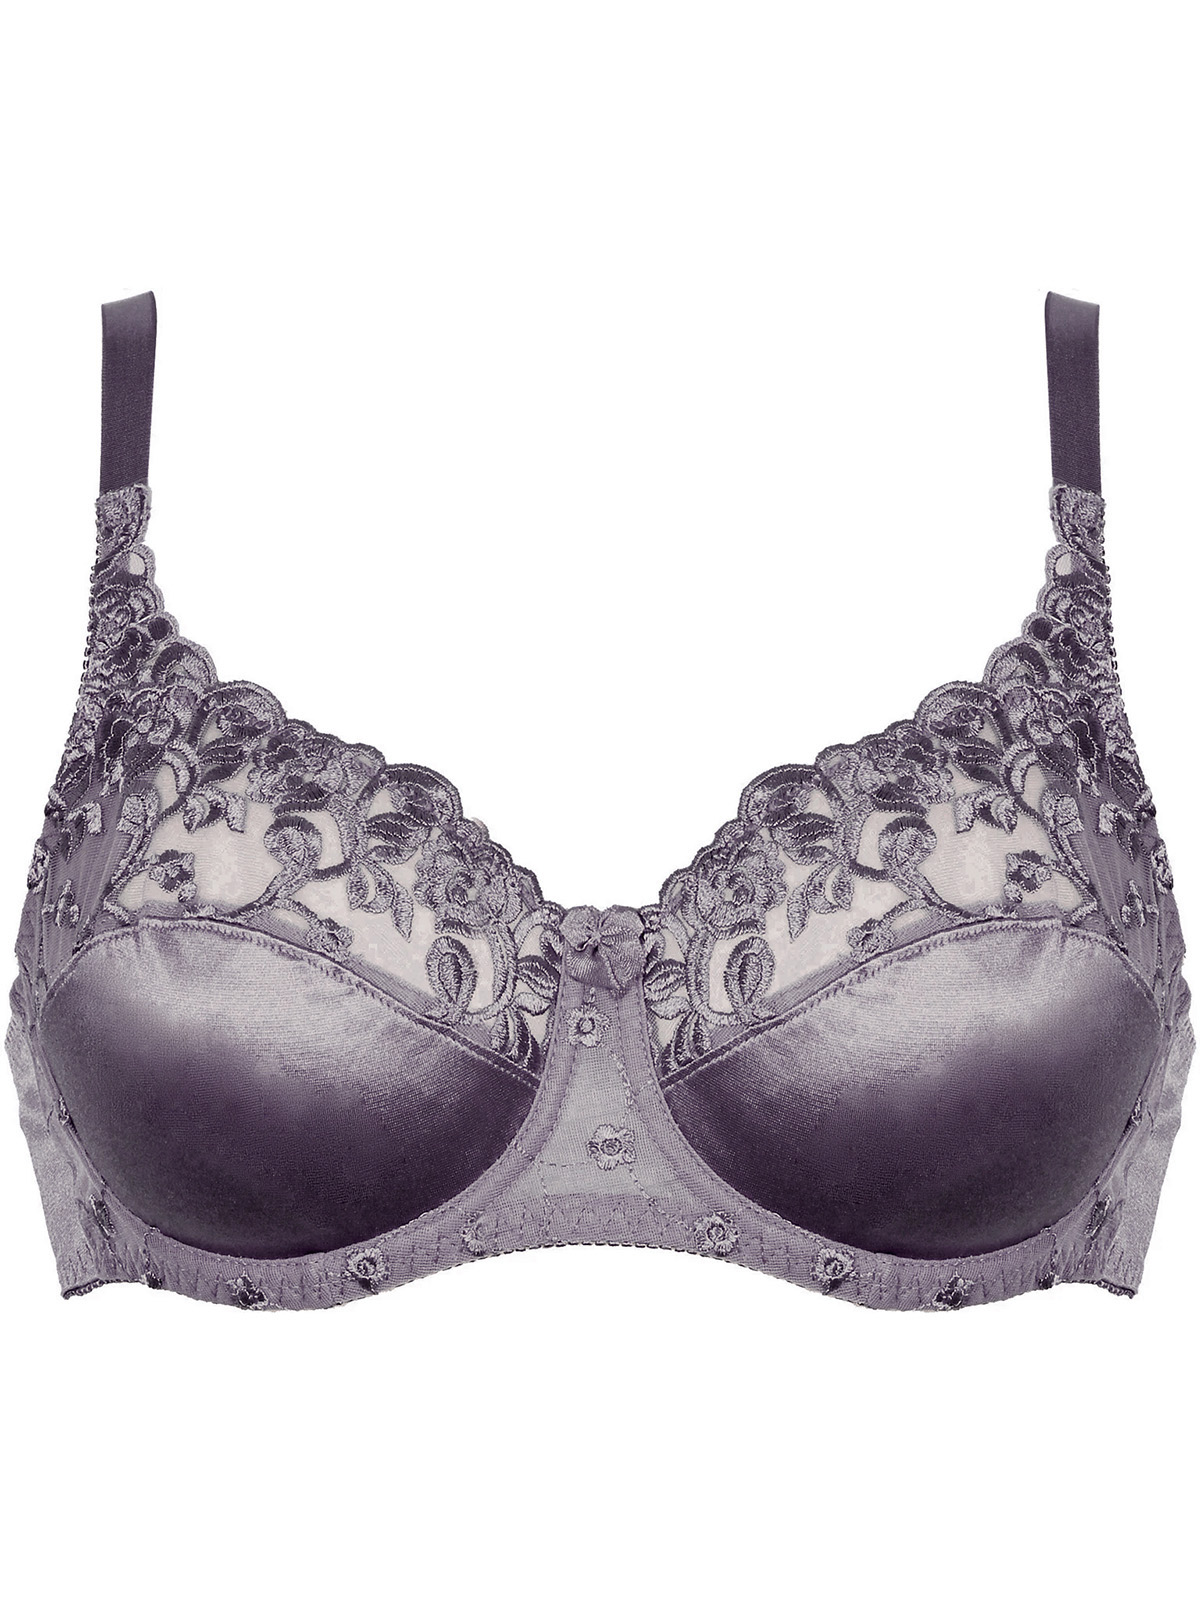 Naturana - - Naturana WHITE Floral Lace Underwired Satin Bra - Size 34 to 44  (B-C-D-DD)